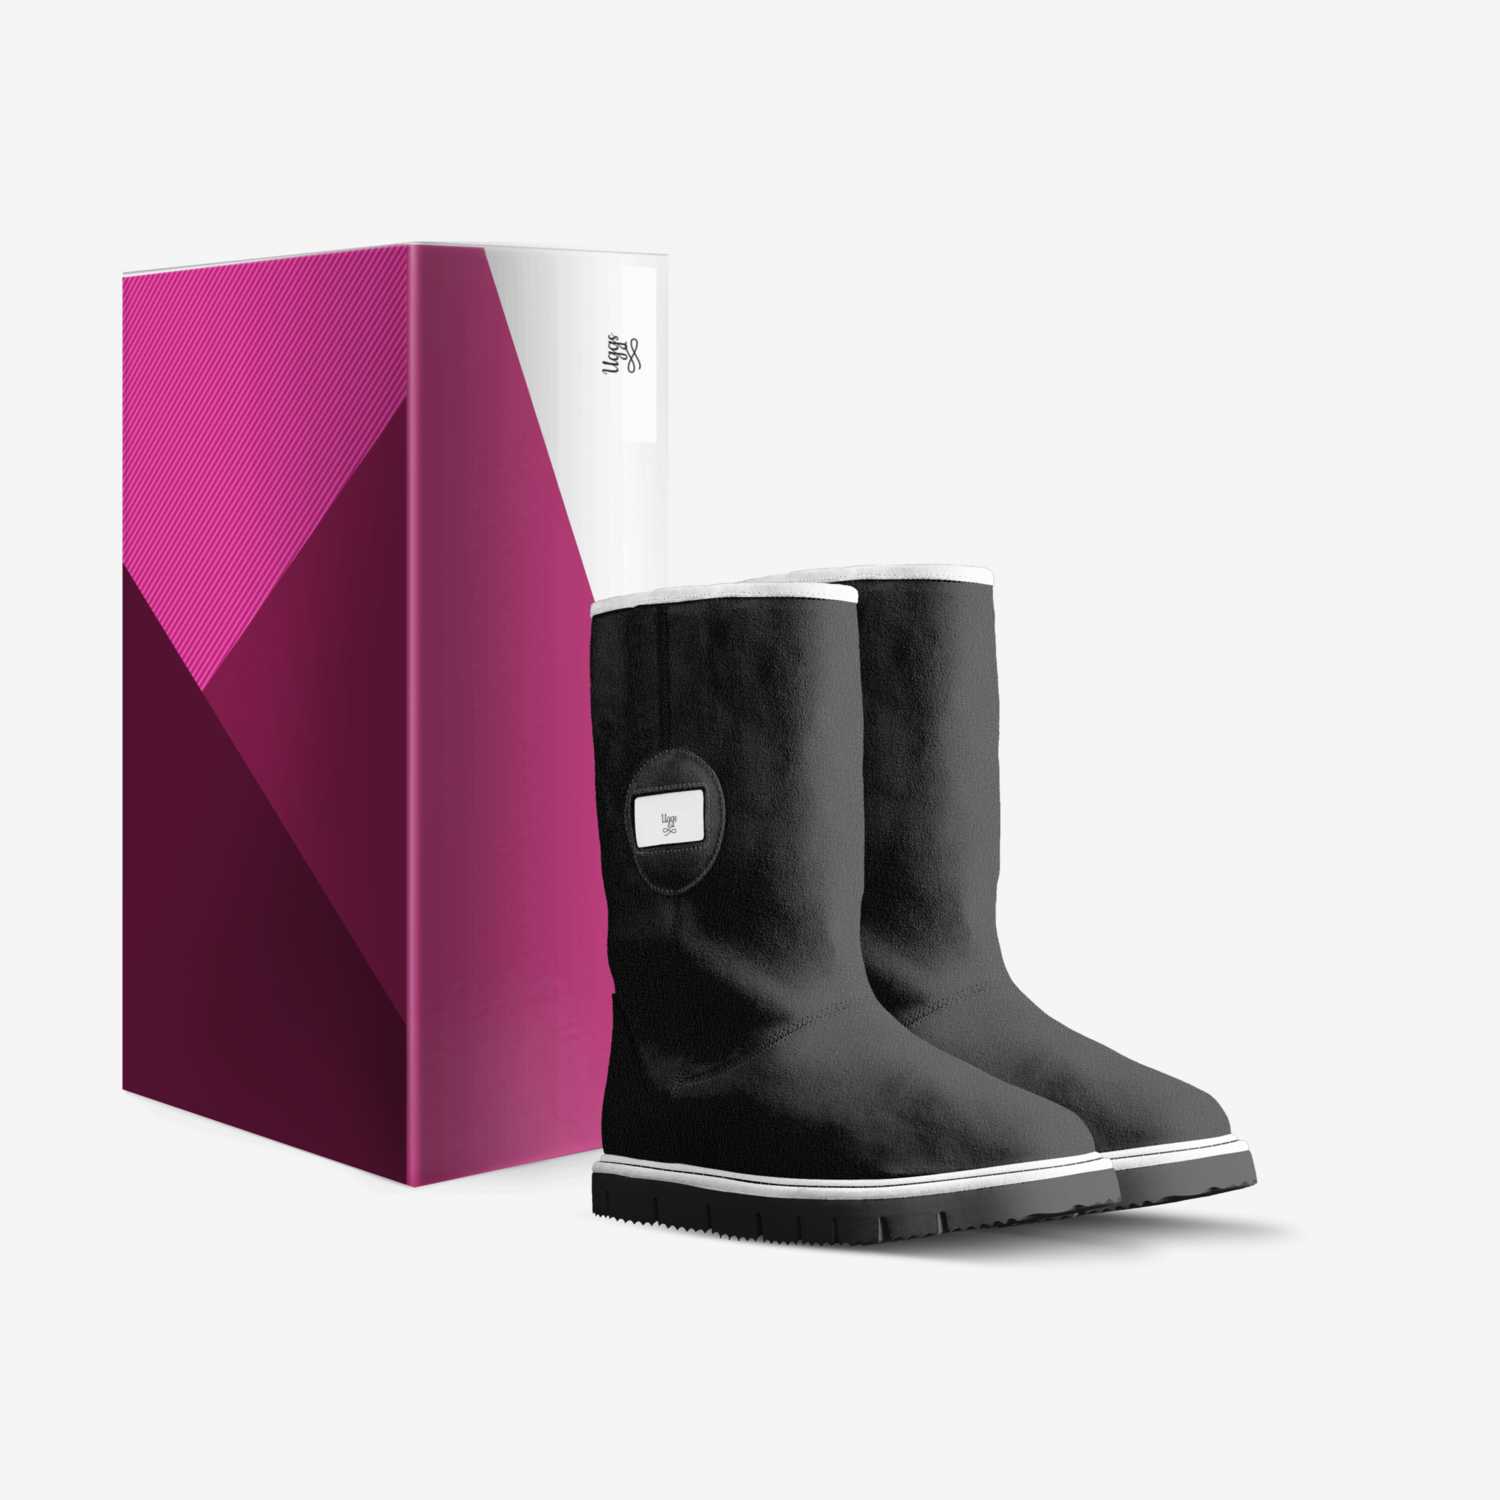 Uggs  A Custom Shoe concept by Crystal